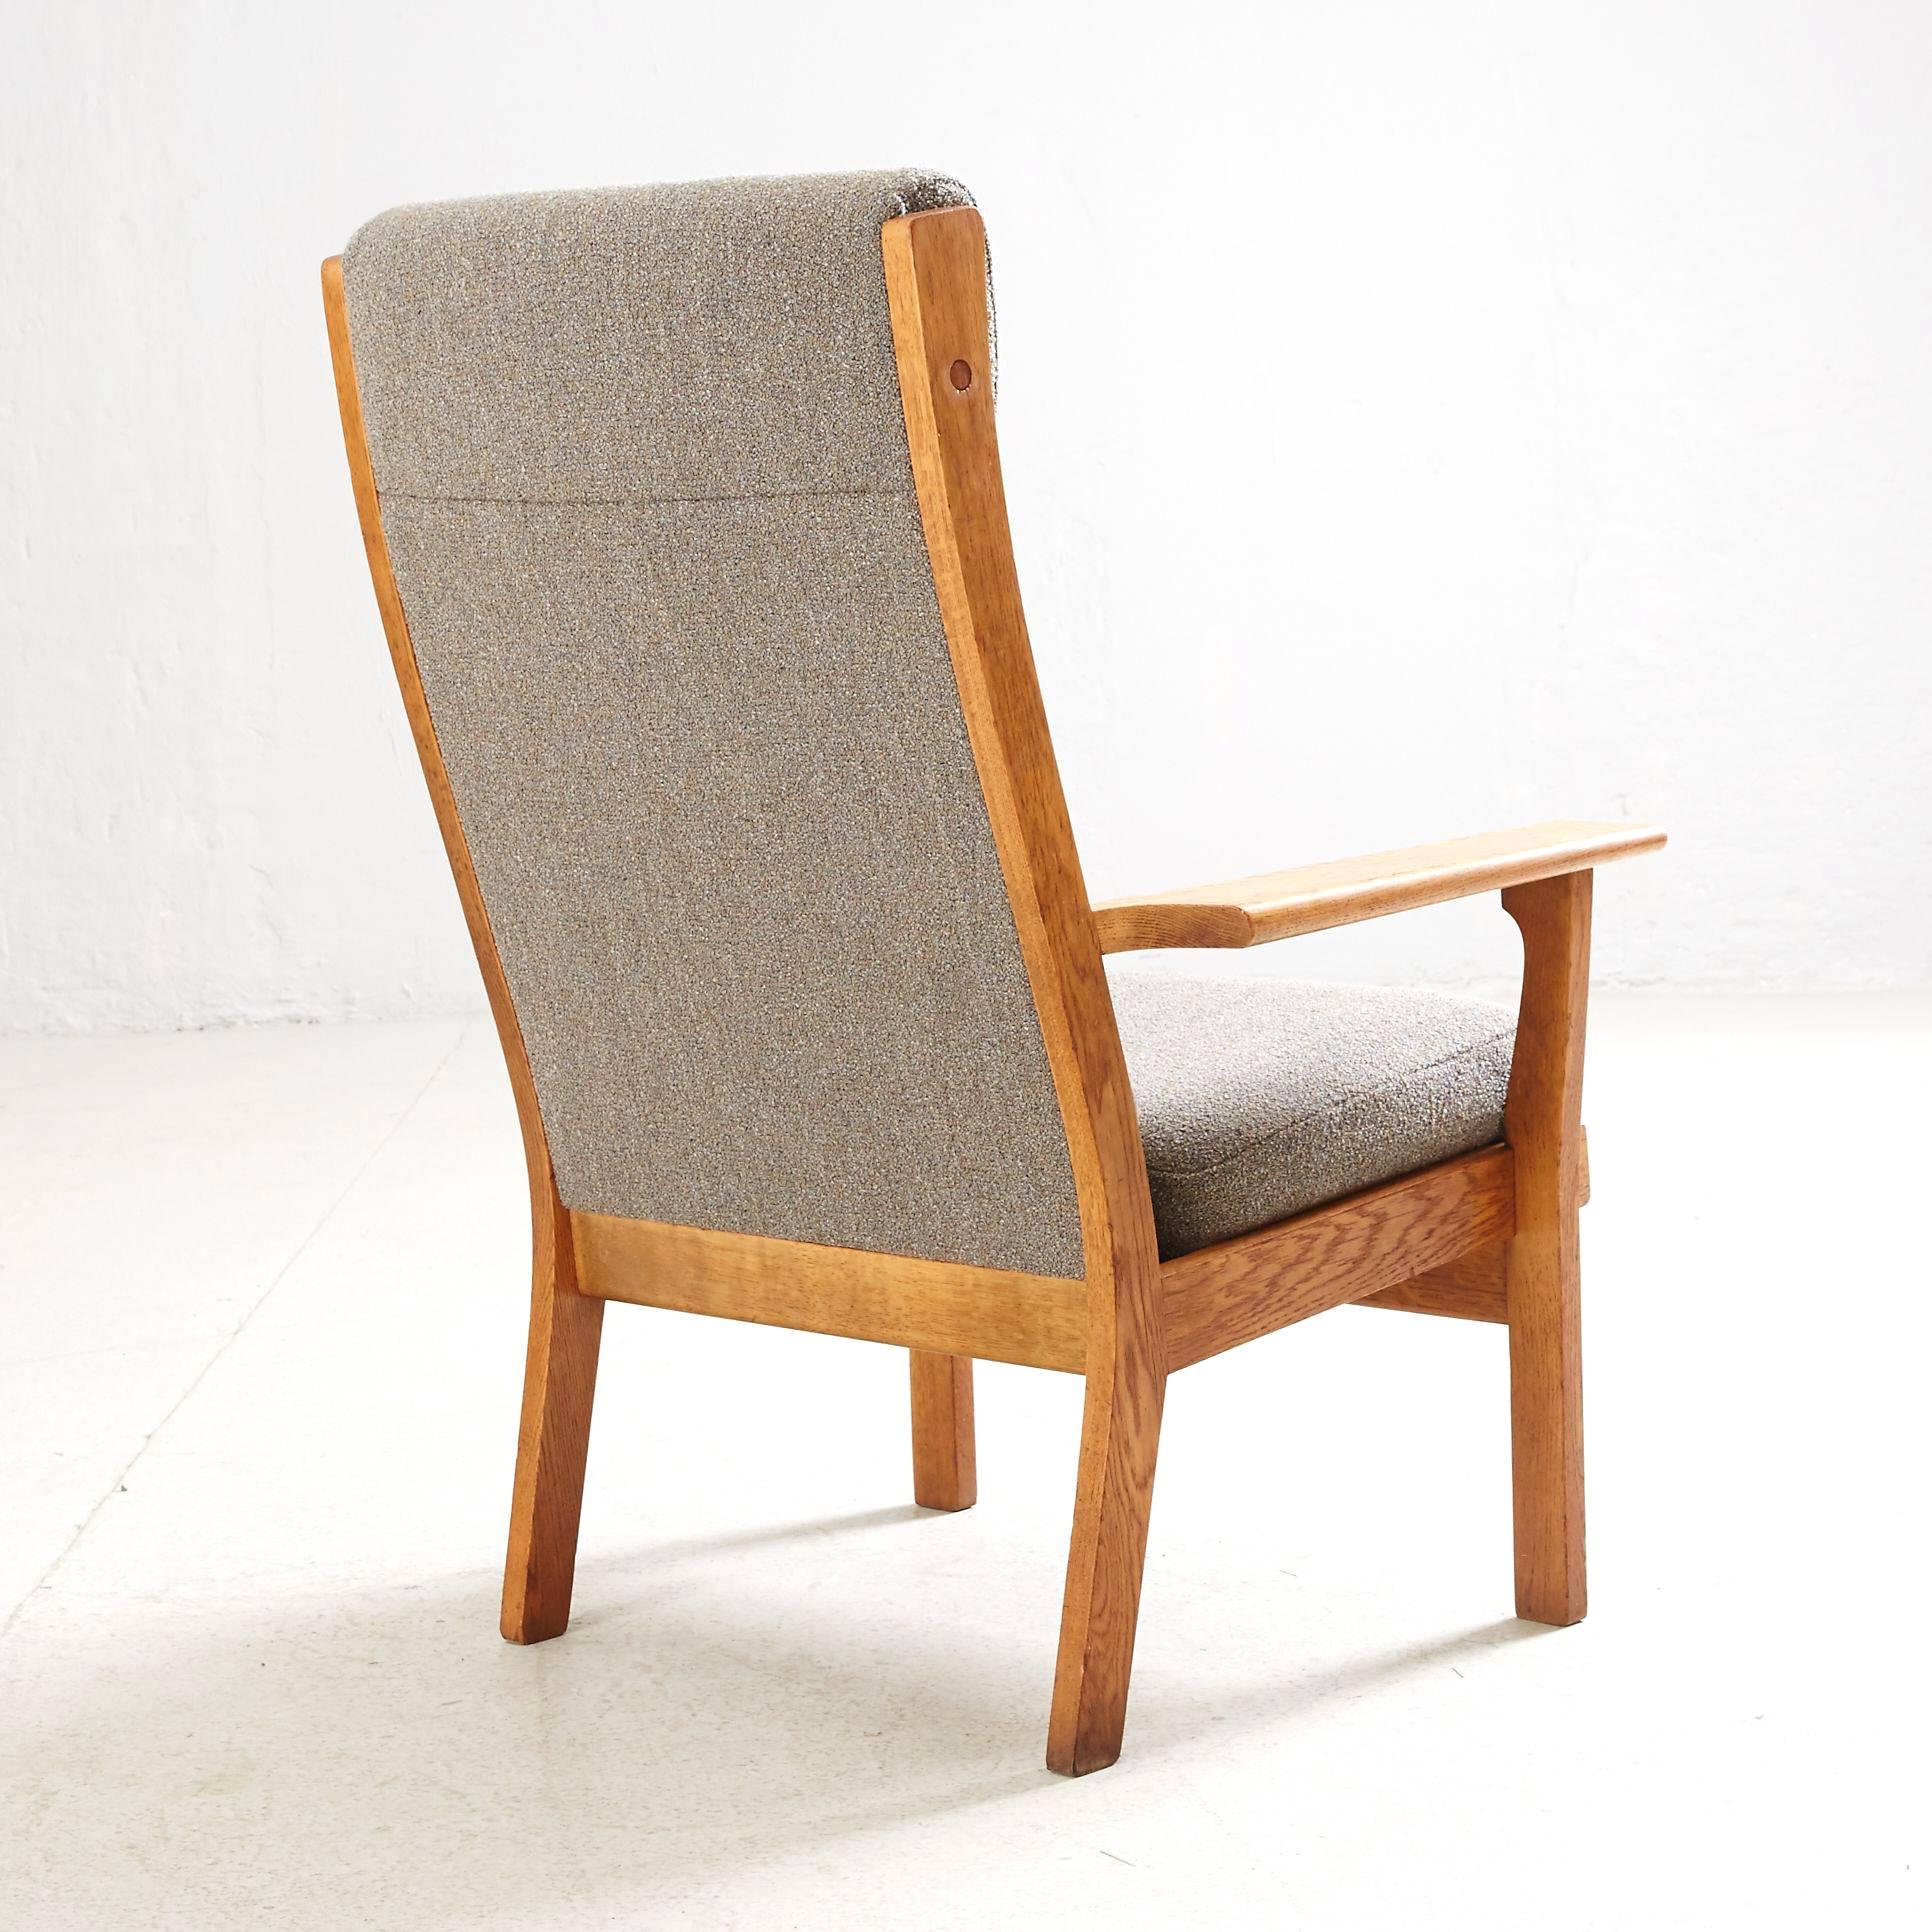 Rare and minimalistic high back lounge-chair designed by Hans Wegner and produced with outstanding craftsmanship by GETAMA in the 1970s. 
Made in natural oak and very fine grey upholstered.